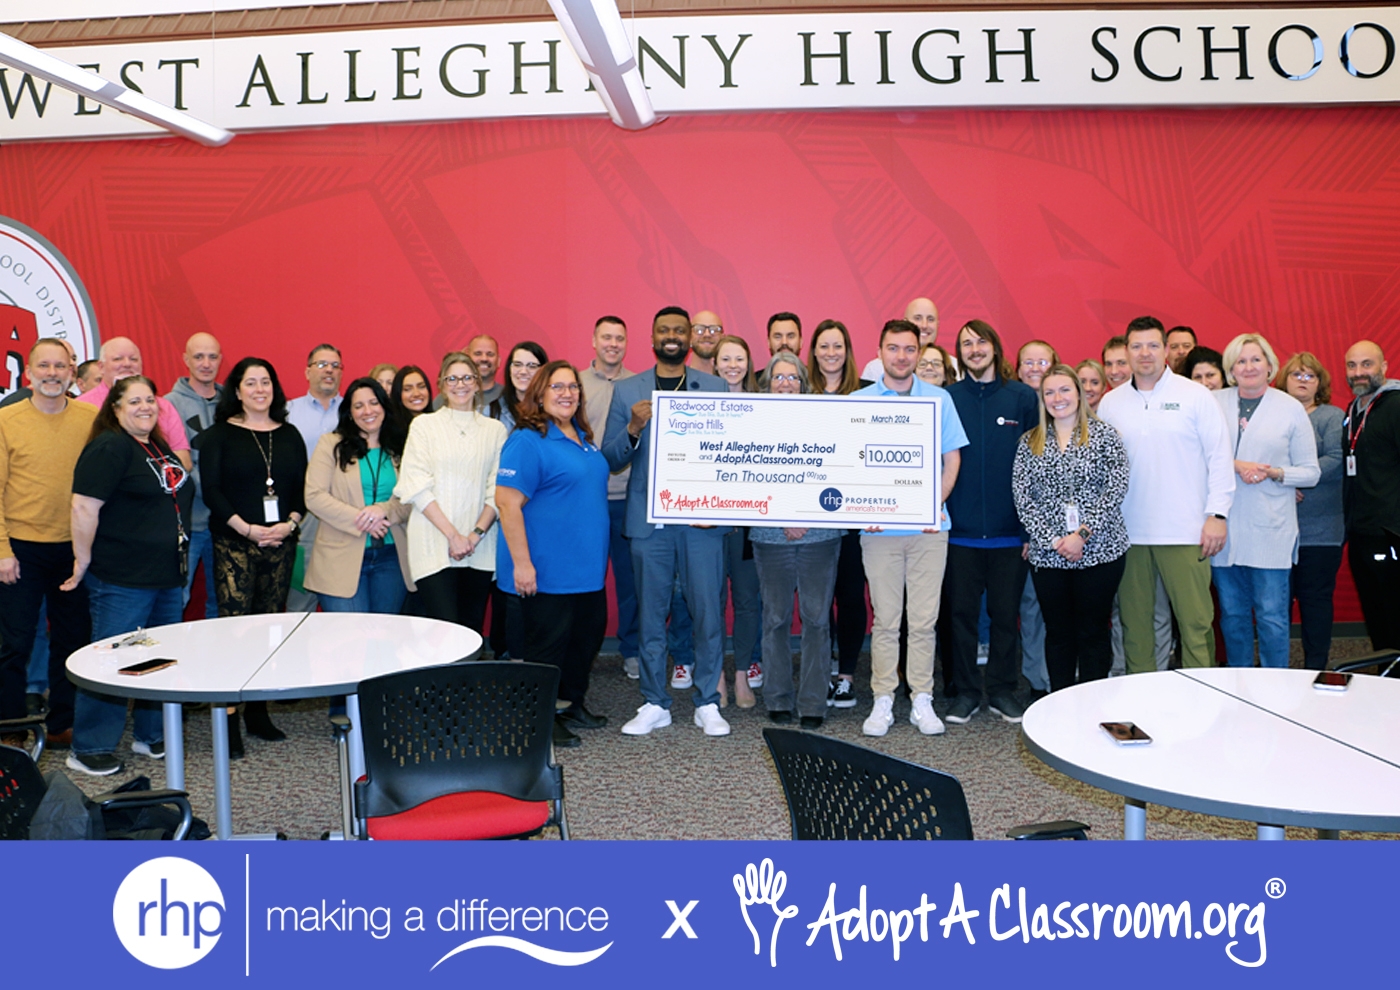 RHP Properties Partners With AdoptAClassroom.org To Support West Allegheny High School in Imperial, Pennsylvania